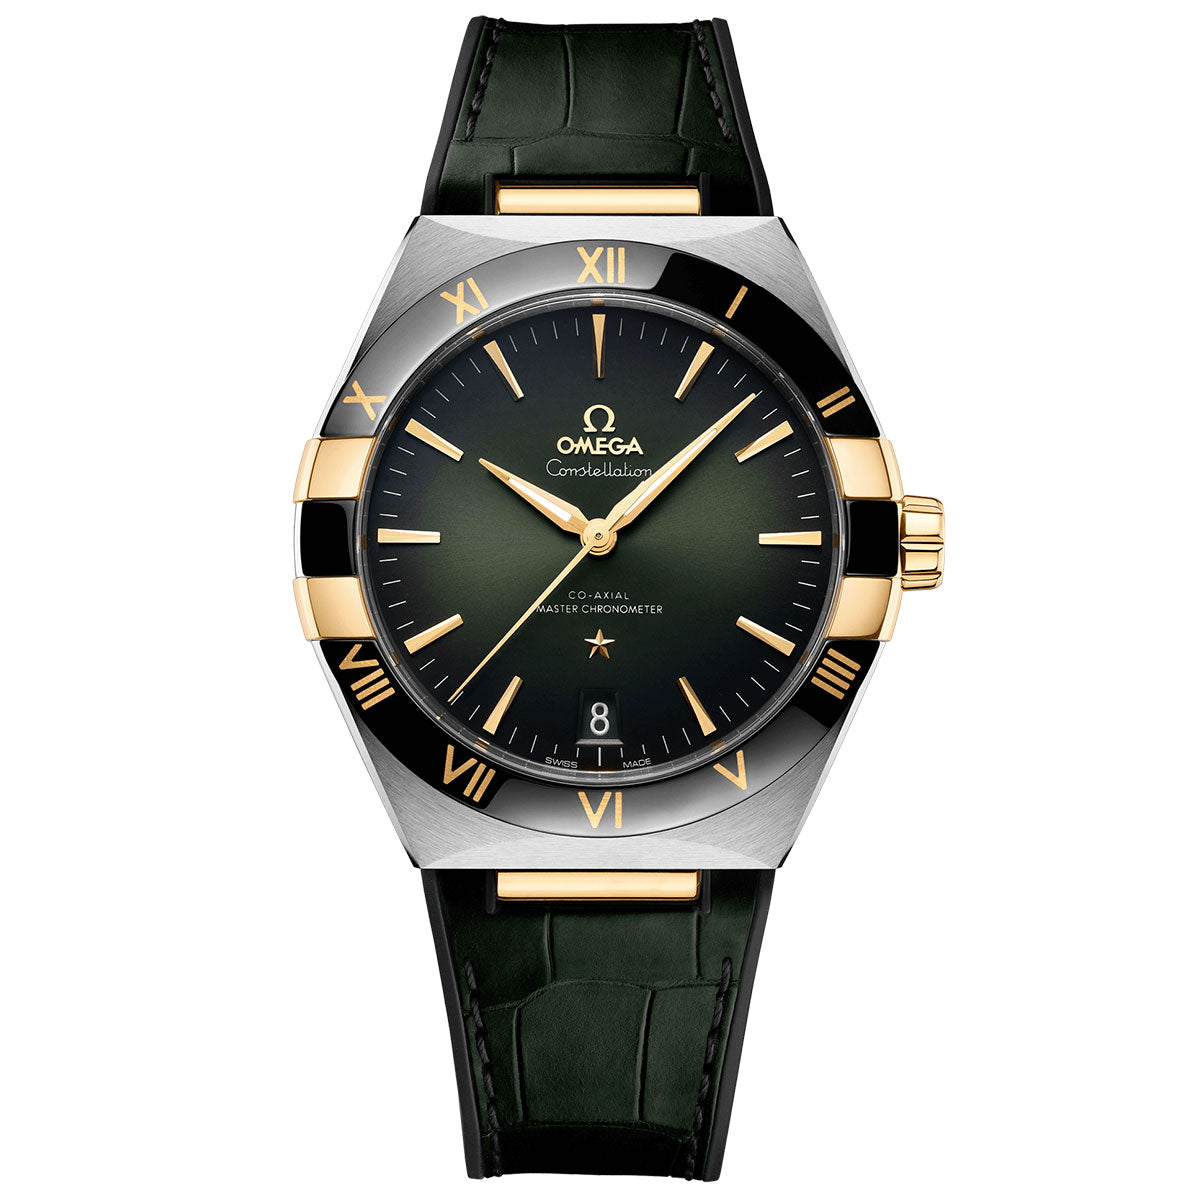 OMEGA Constellation Co-Axial Master Chronometer 41mm Watch